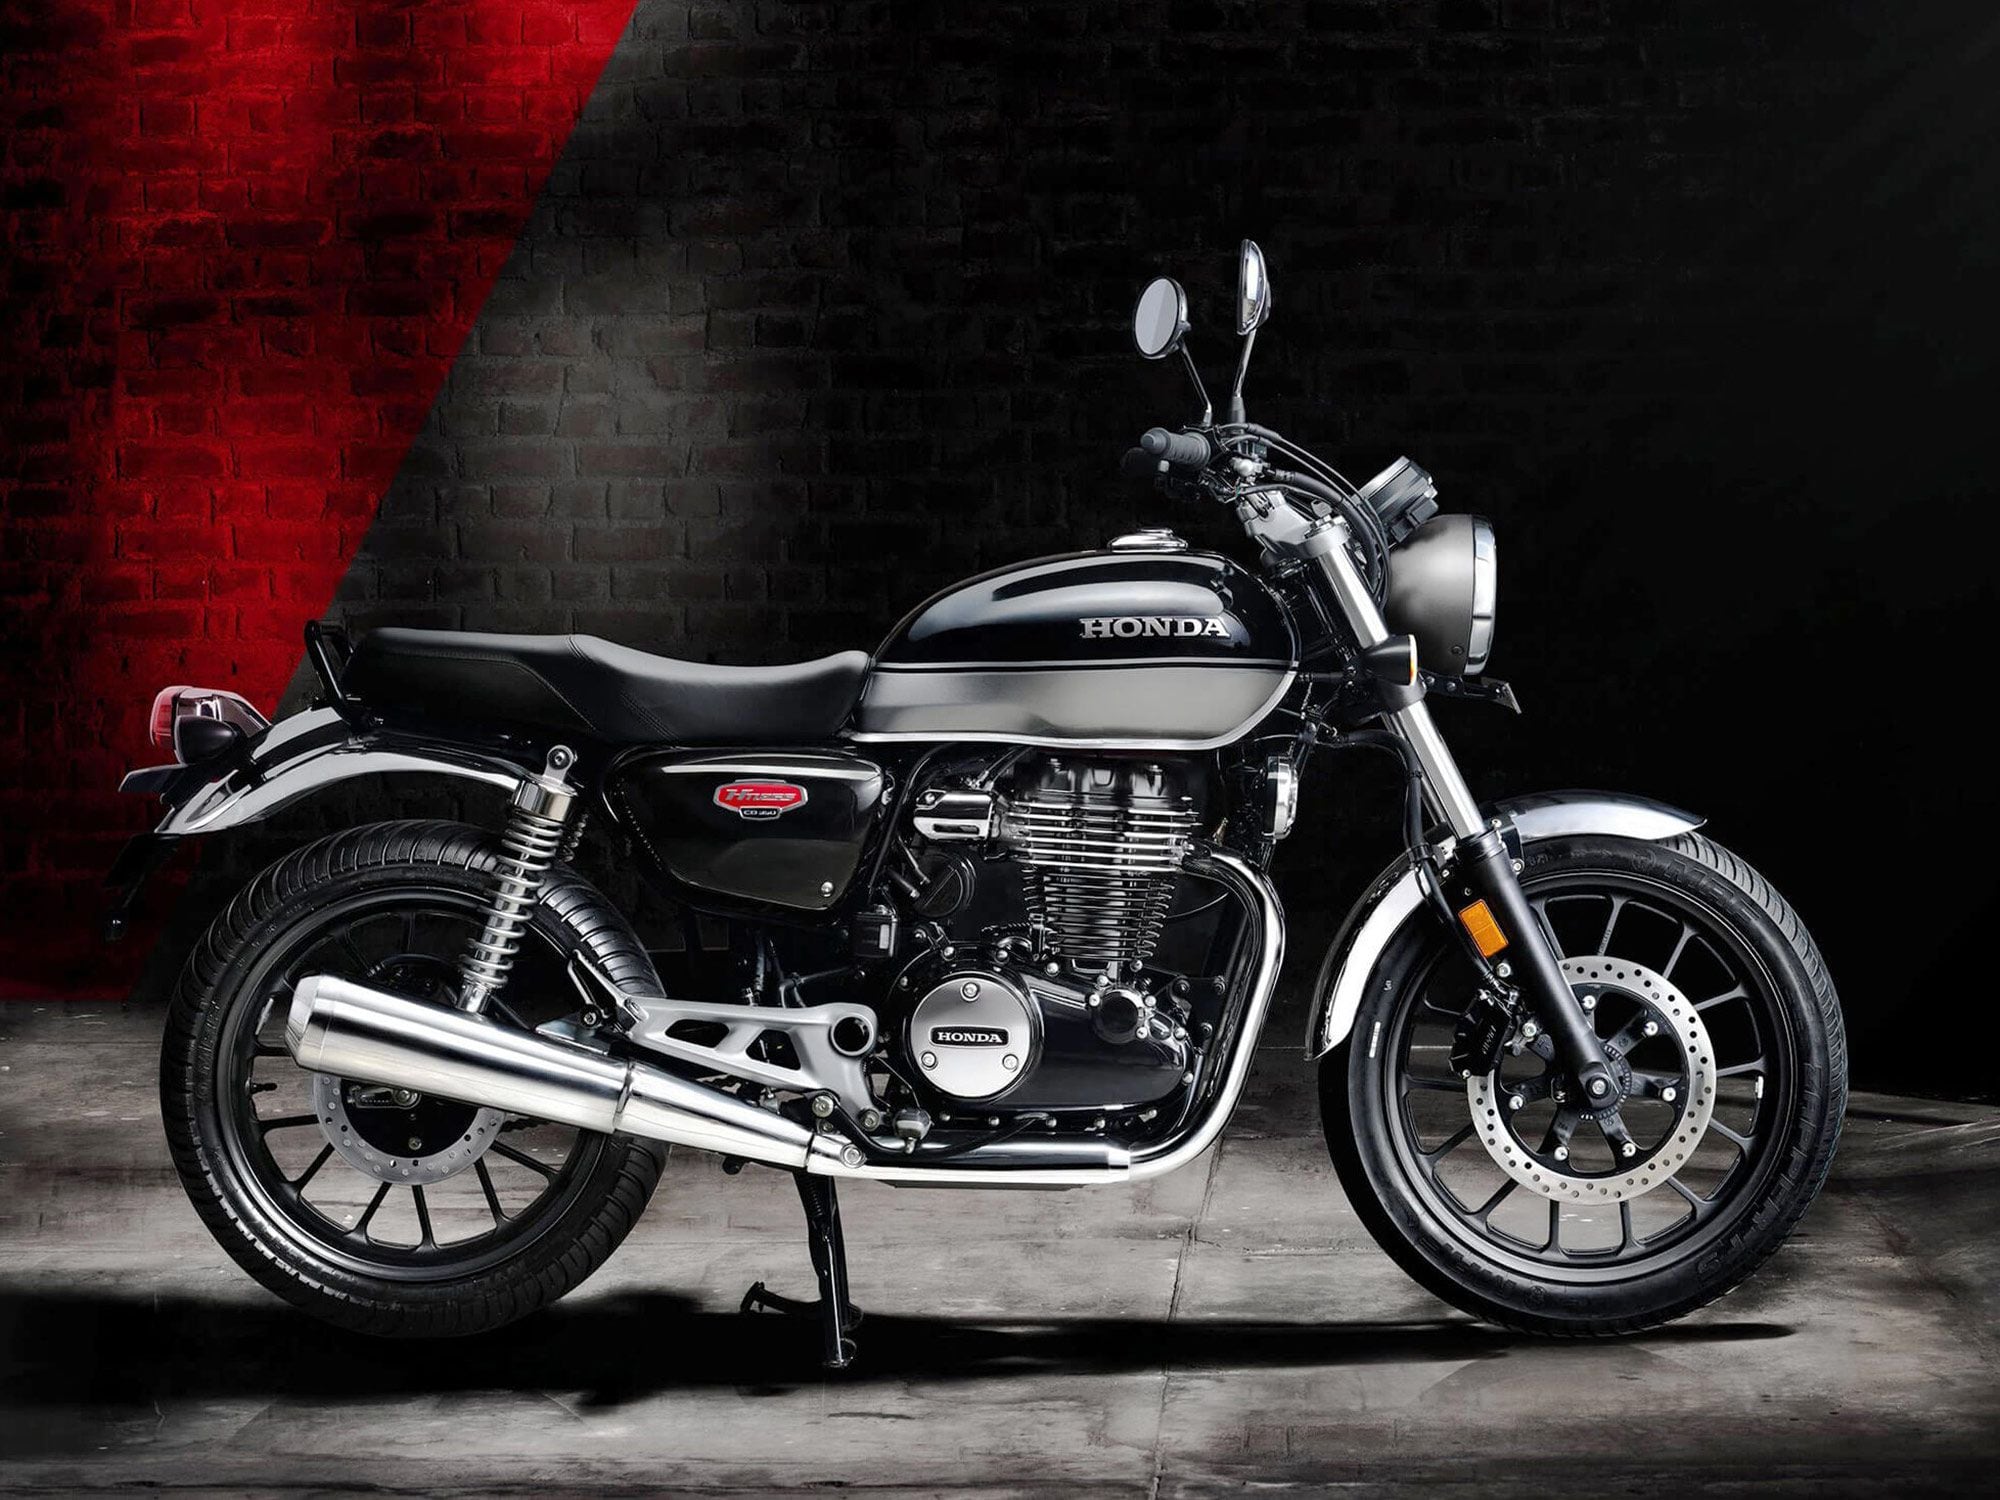 Honda’s ultra-classic CB350 was released in India just a few months back and is already a big hit for the Japanese manufacturer.